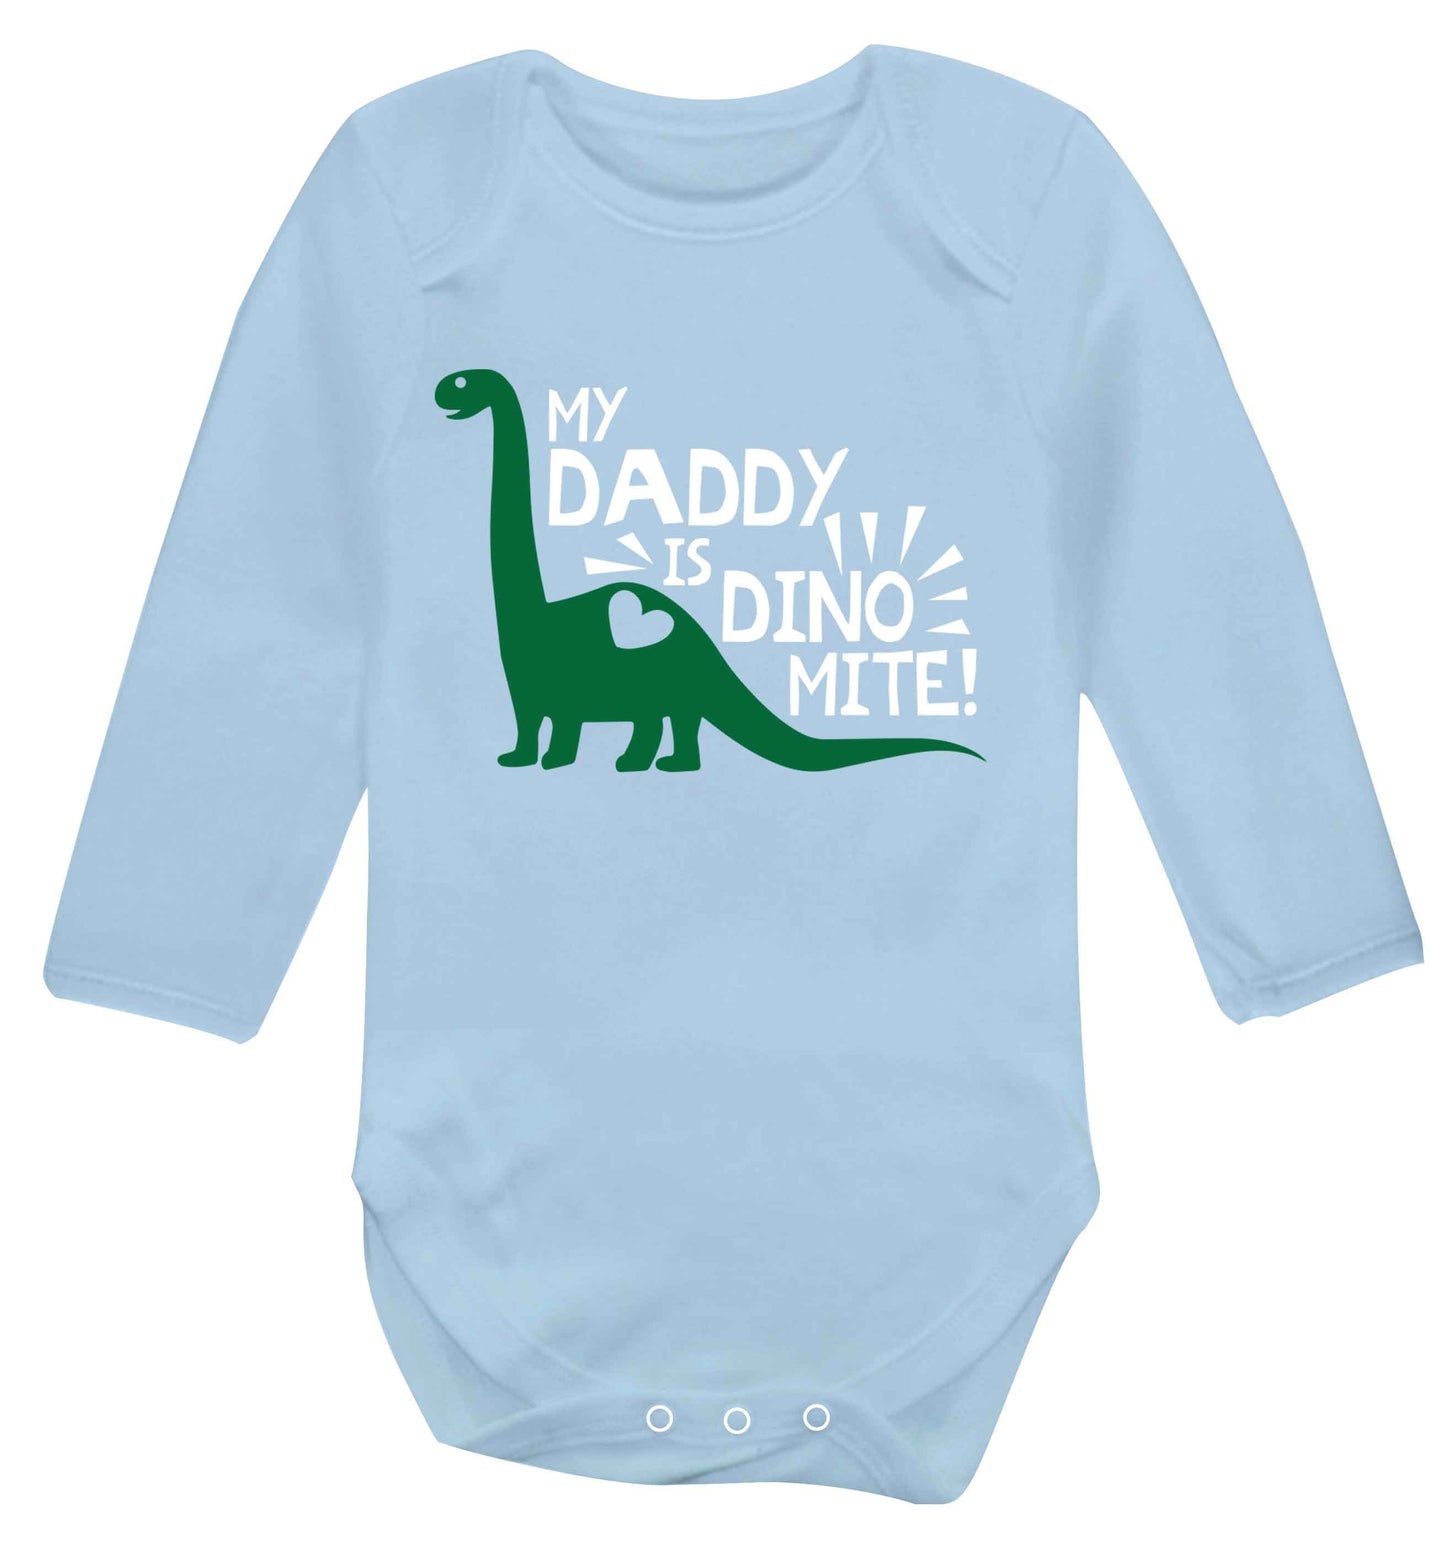 My daddy is dinomite! Baby Vest long sleeved pale blue 6-12 months